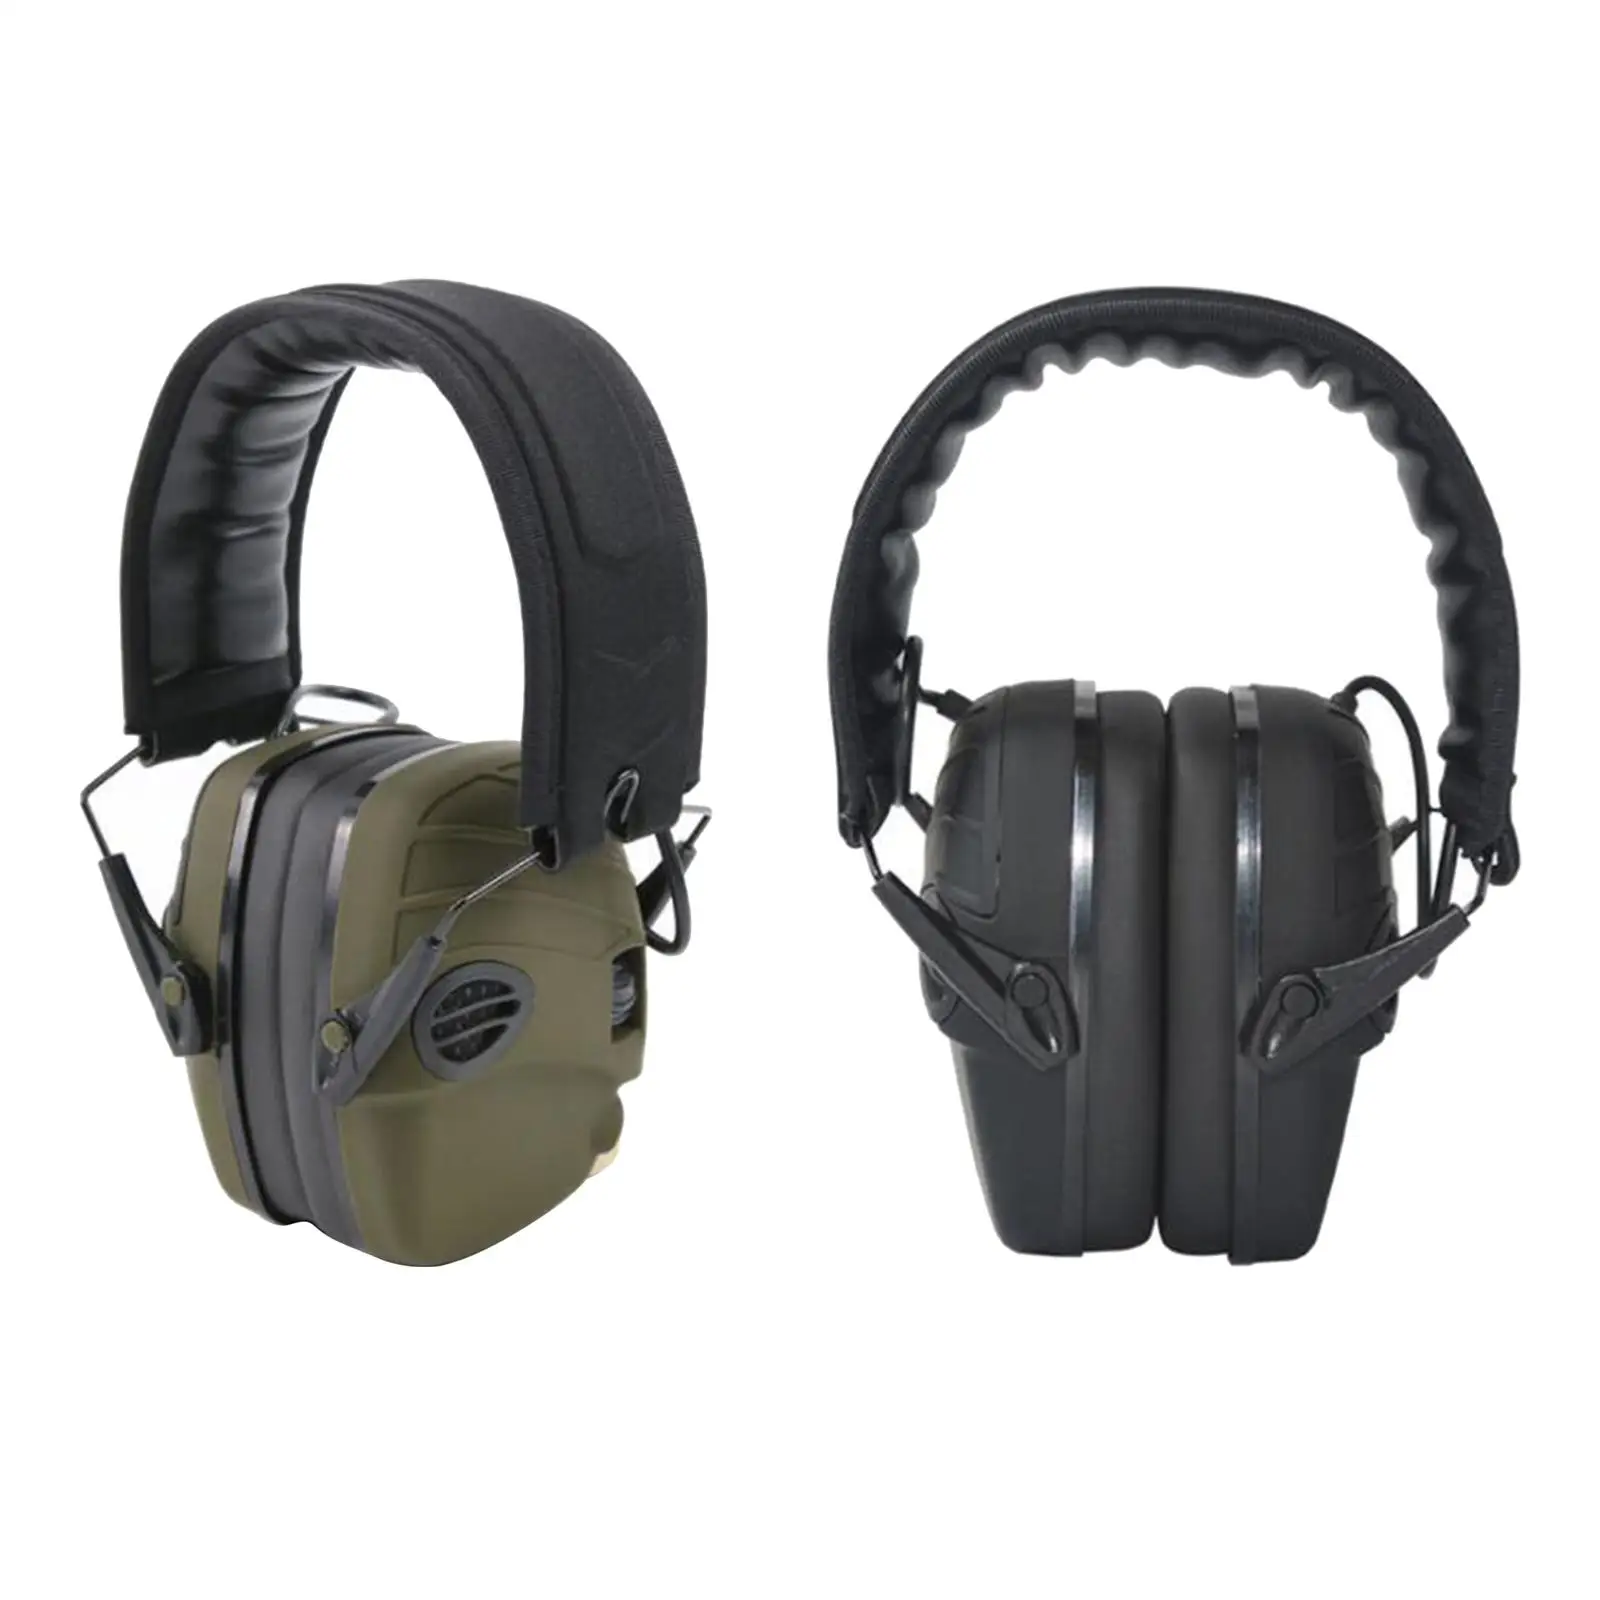 Shooting Safety Earmuffs Noise Reduction Sound Amplification Range Ear Defenders